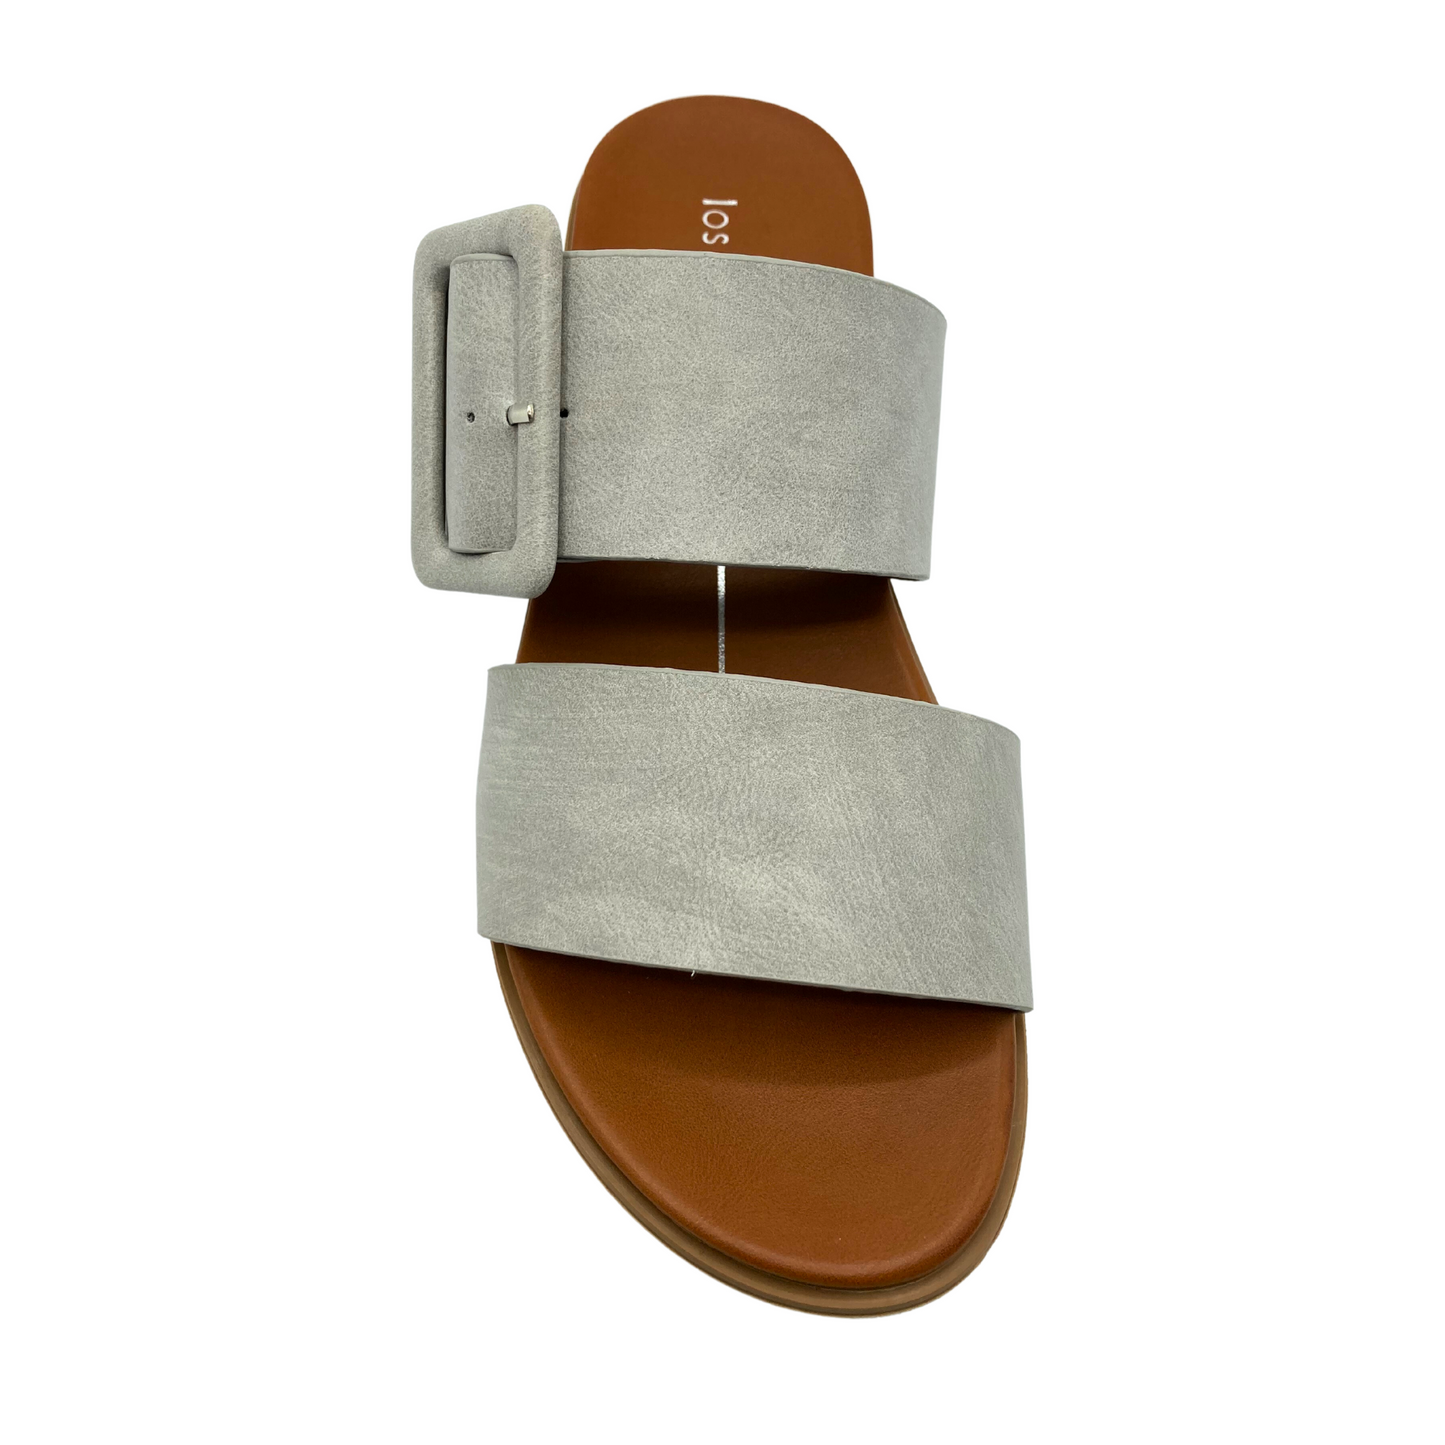 Top down view of a slip on sandal with 2 wide straps.  Shown in a beige/grey color